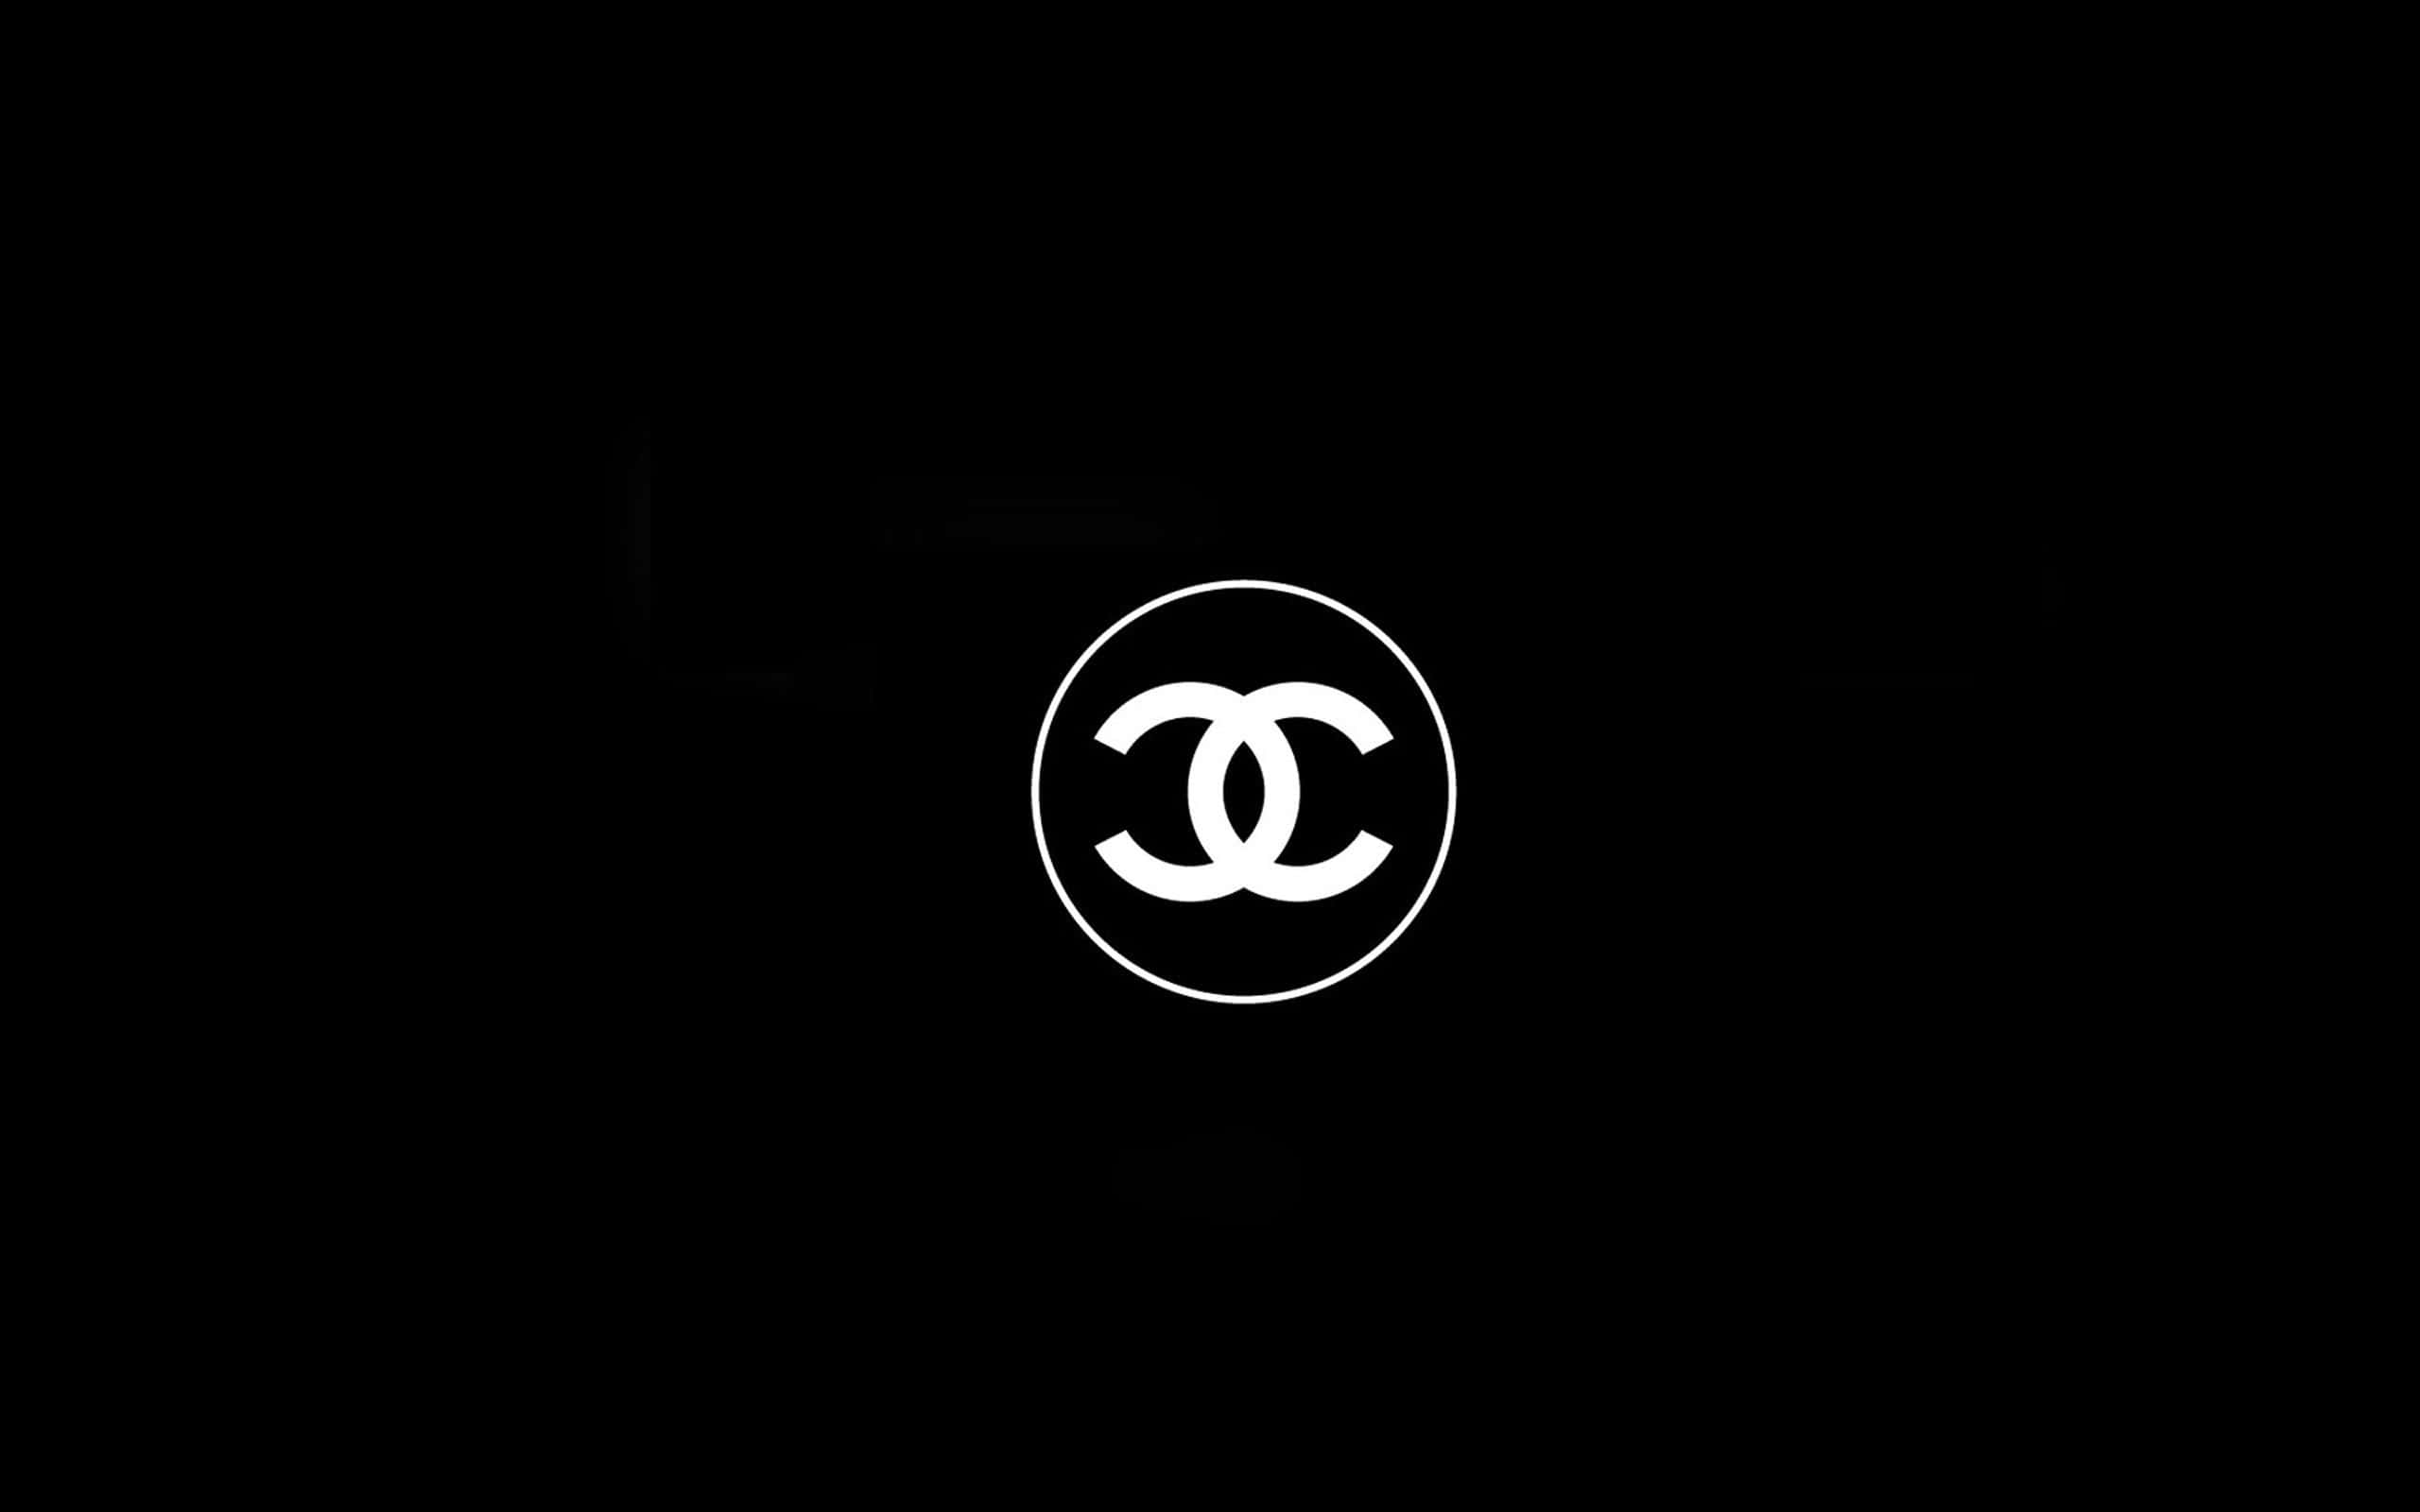 Download The iconic Chanel logo.